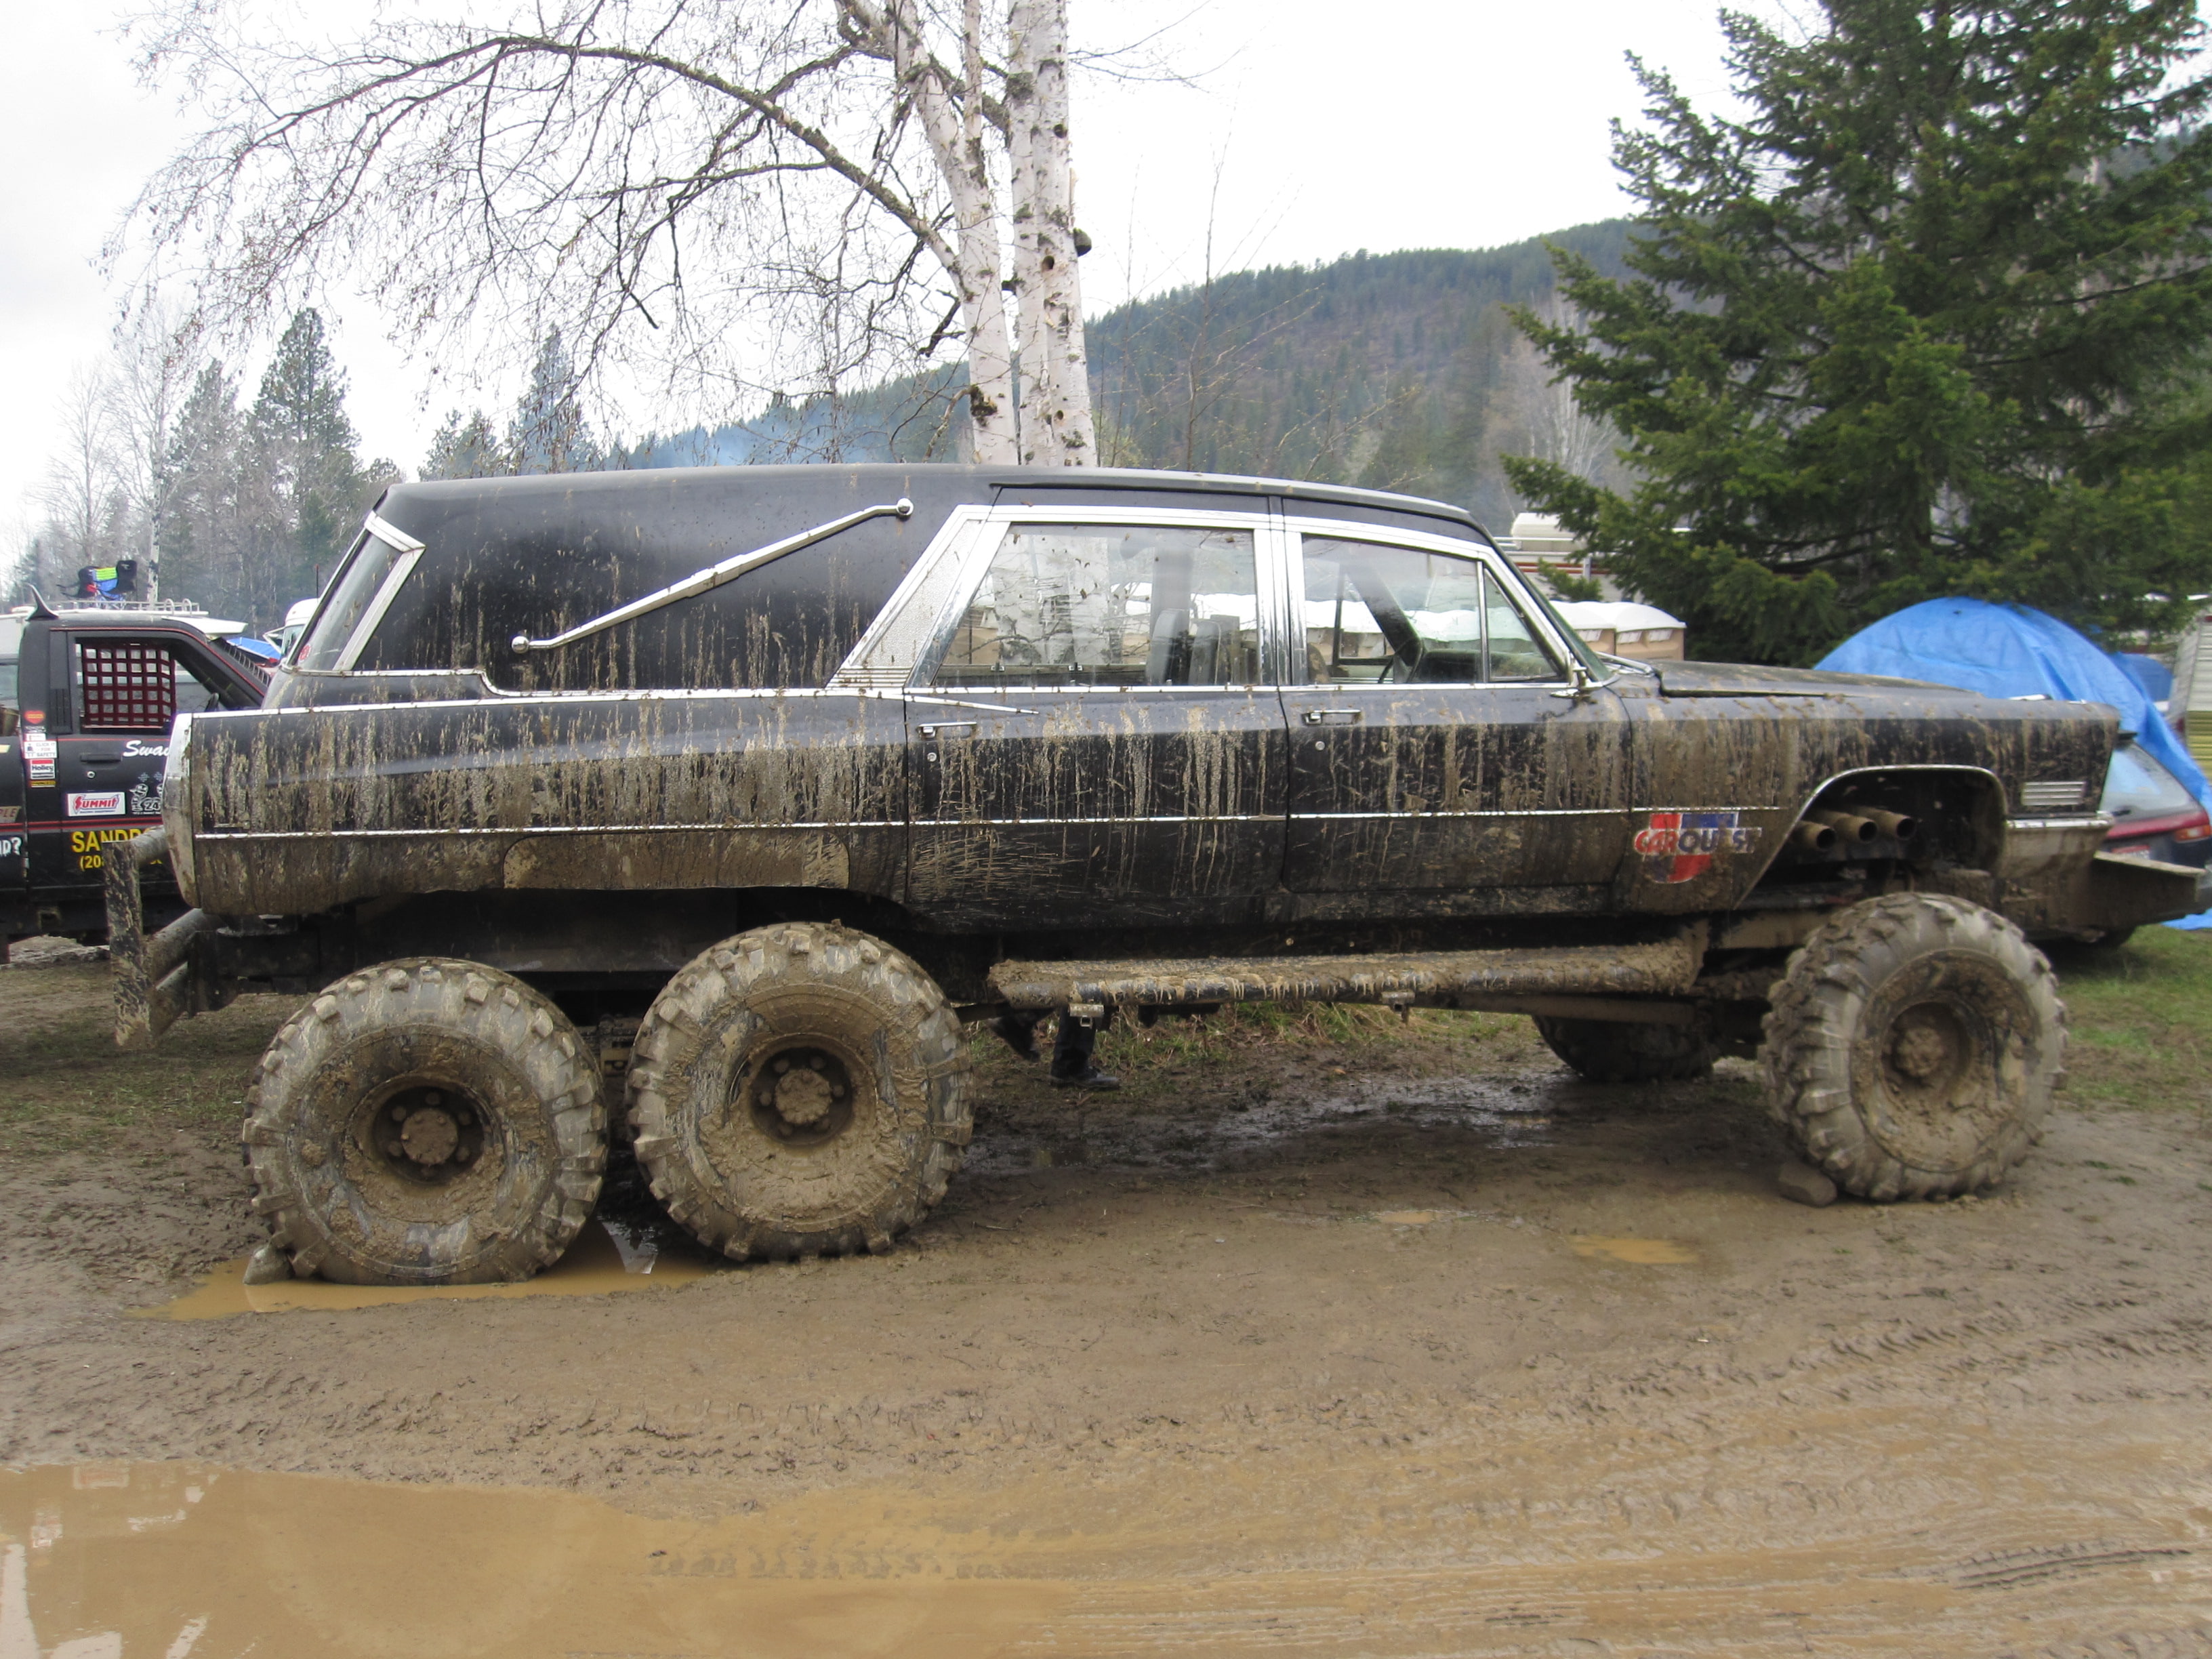 6x6, cadillac, monster truck, mud bogging, offroad, race, racing